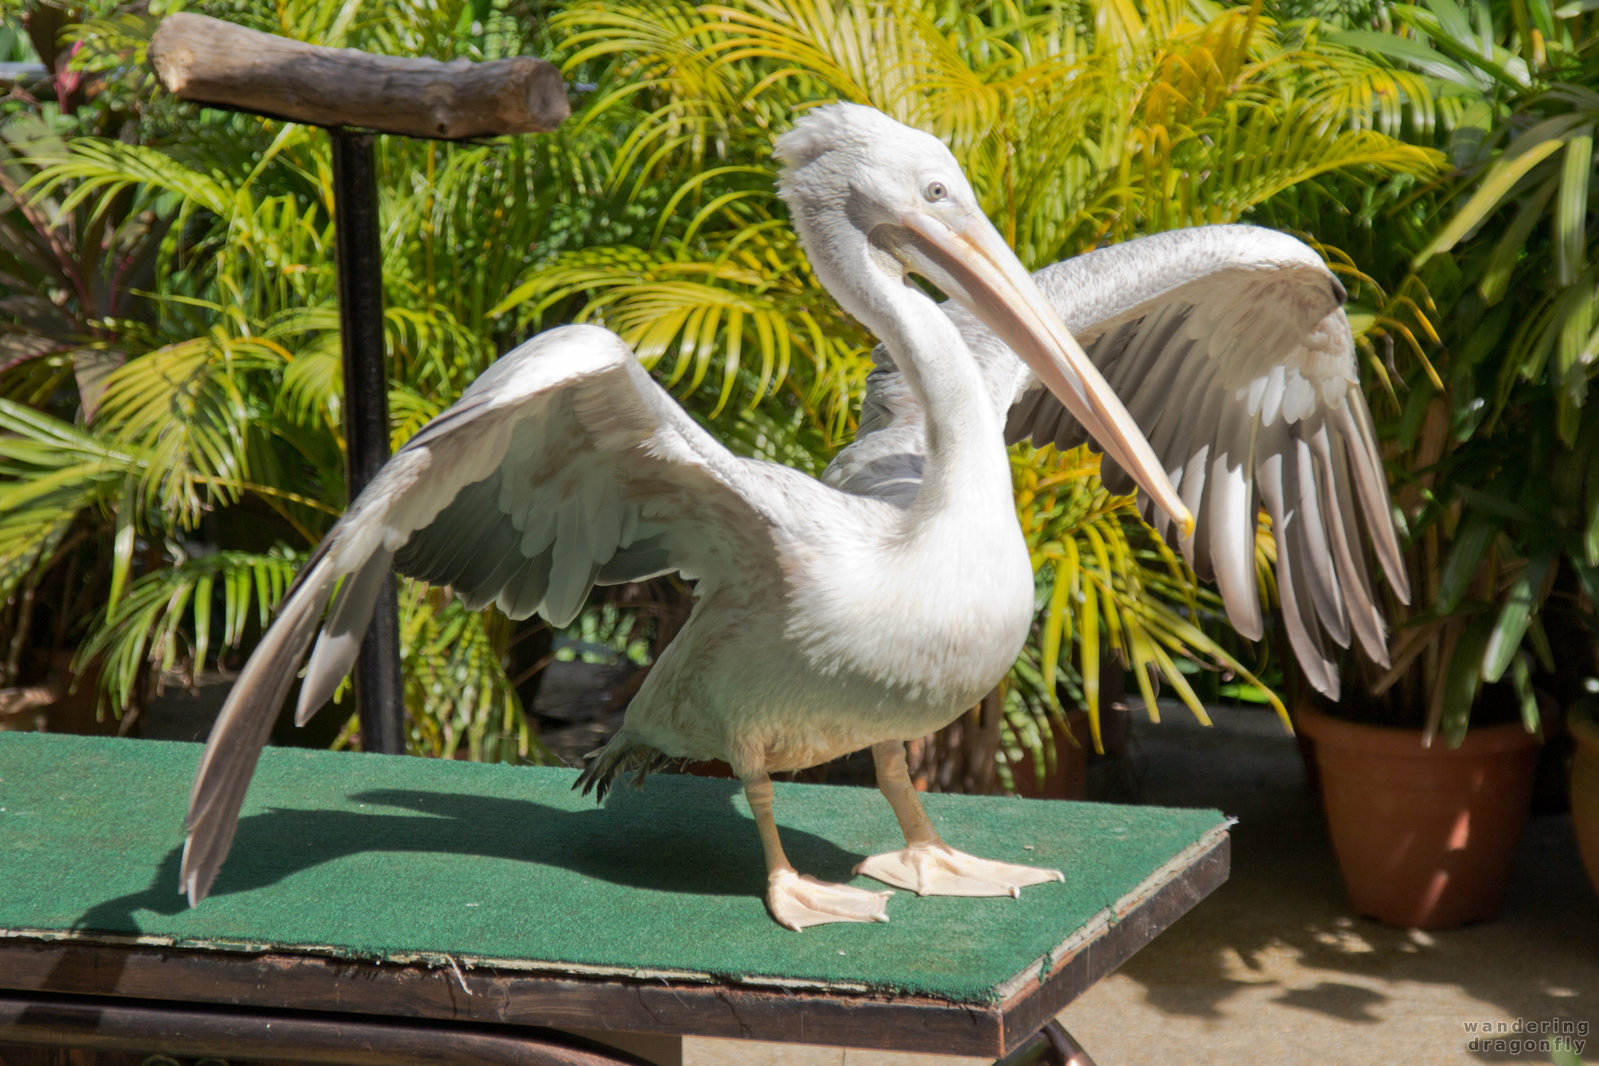 Pelican on the table -- pelican